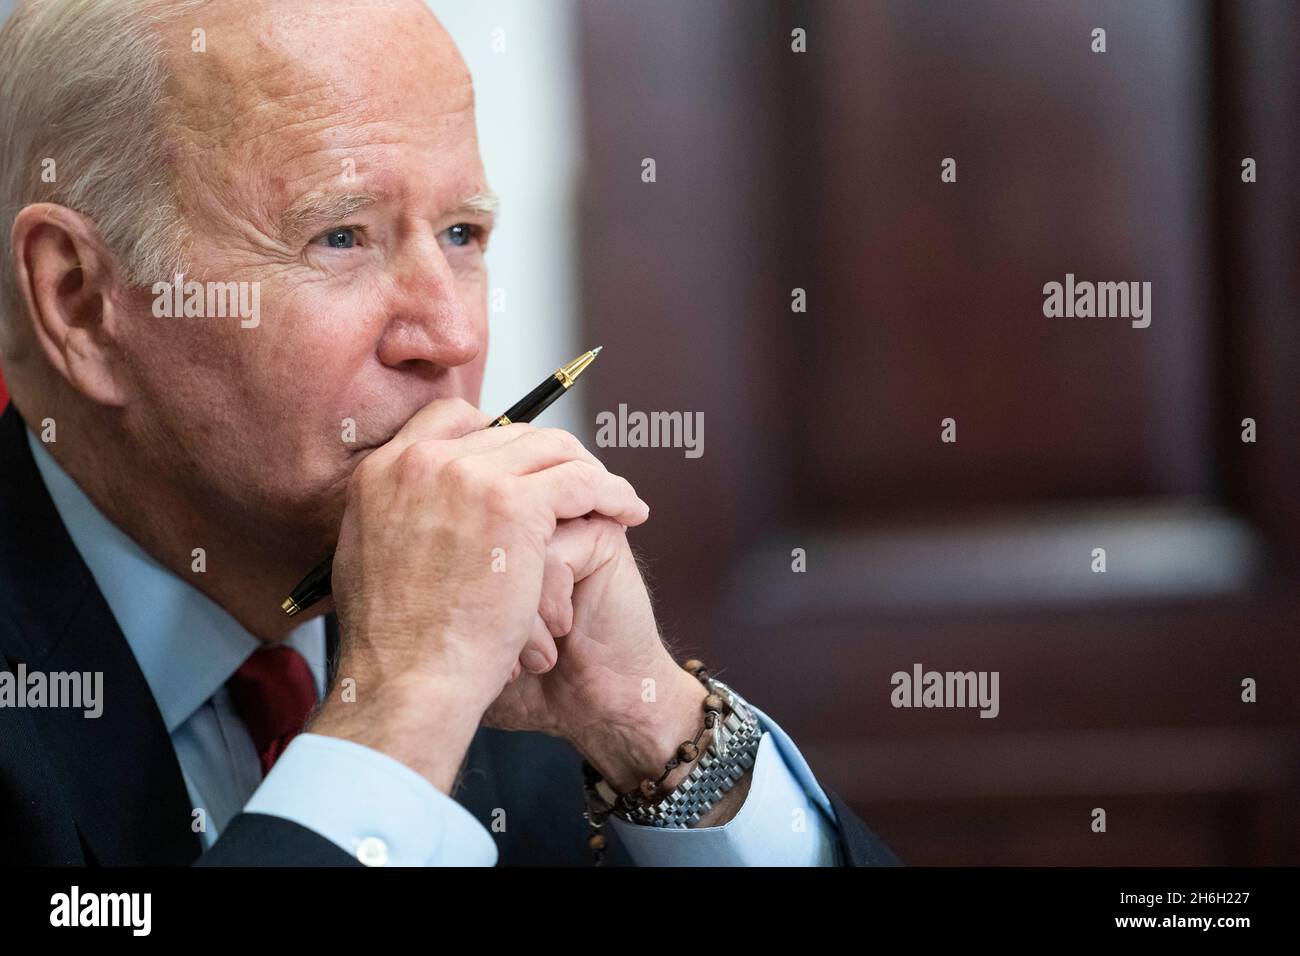 Washington, United States. 15th Nov, 2021. President Joe Biden listens during a virtual summit with Chinese President Xi Jinping in the Roosevelt Room of the White House in Washington DC on Monday, November 15, 2021. Photo by Sarah Silbiger/Pool/Sipa USA Credit: Sipa USA/Alamy Live News Stock Photo